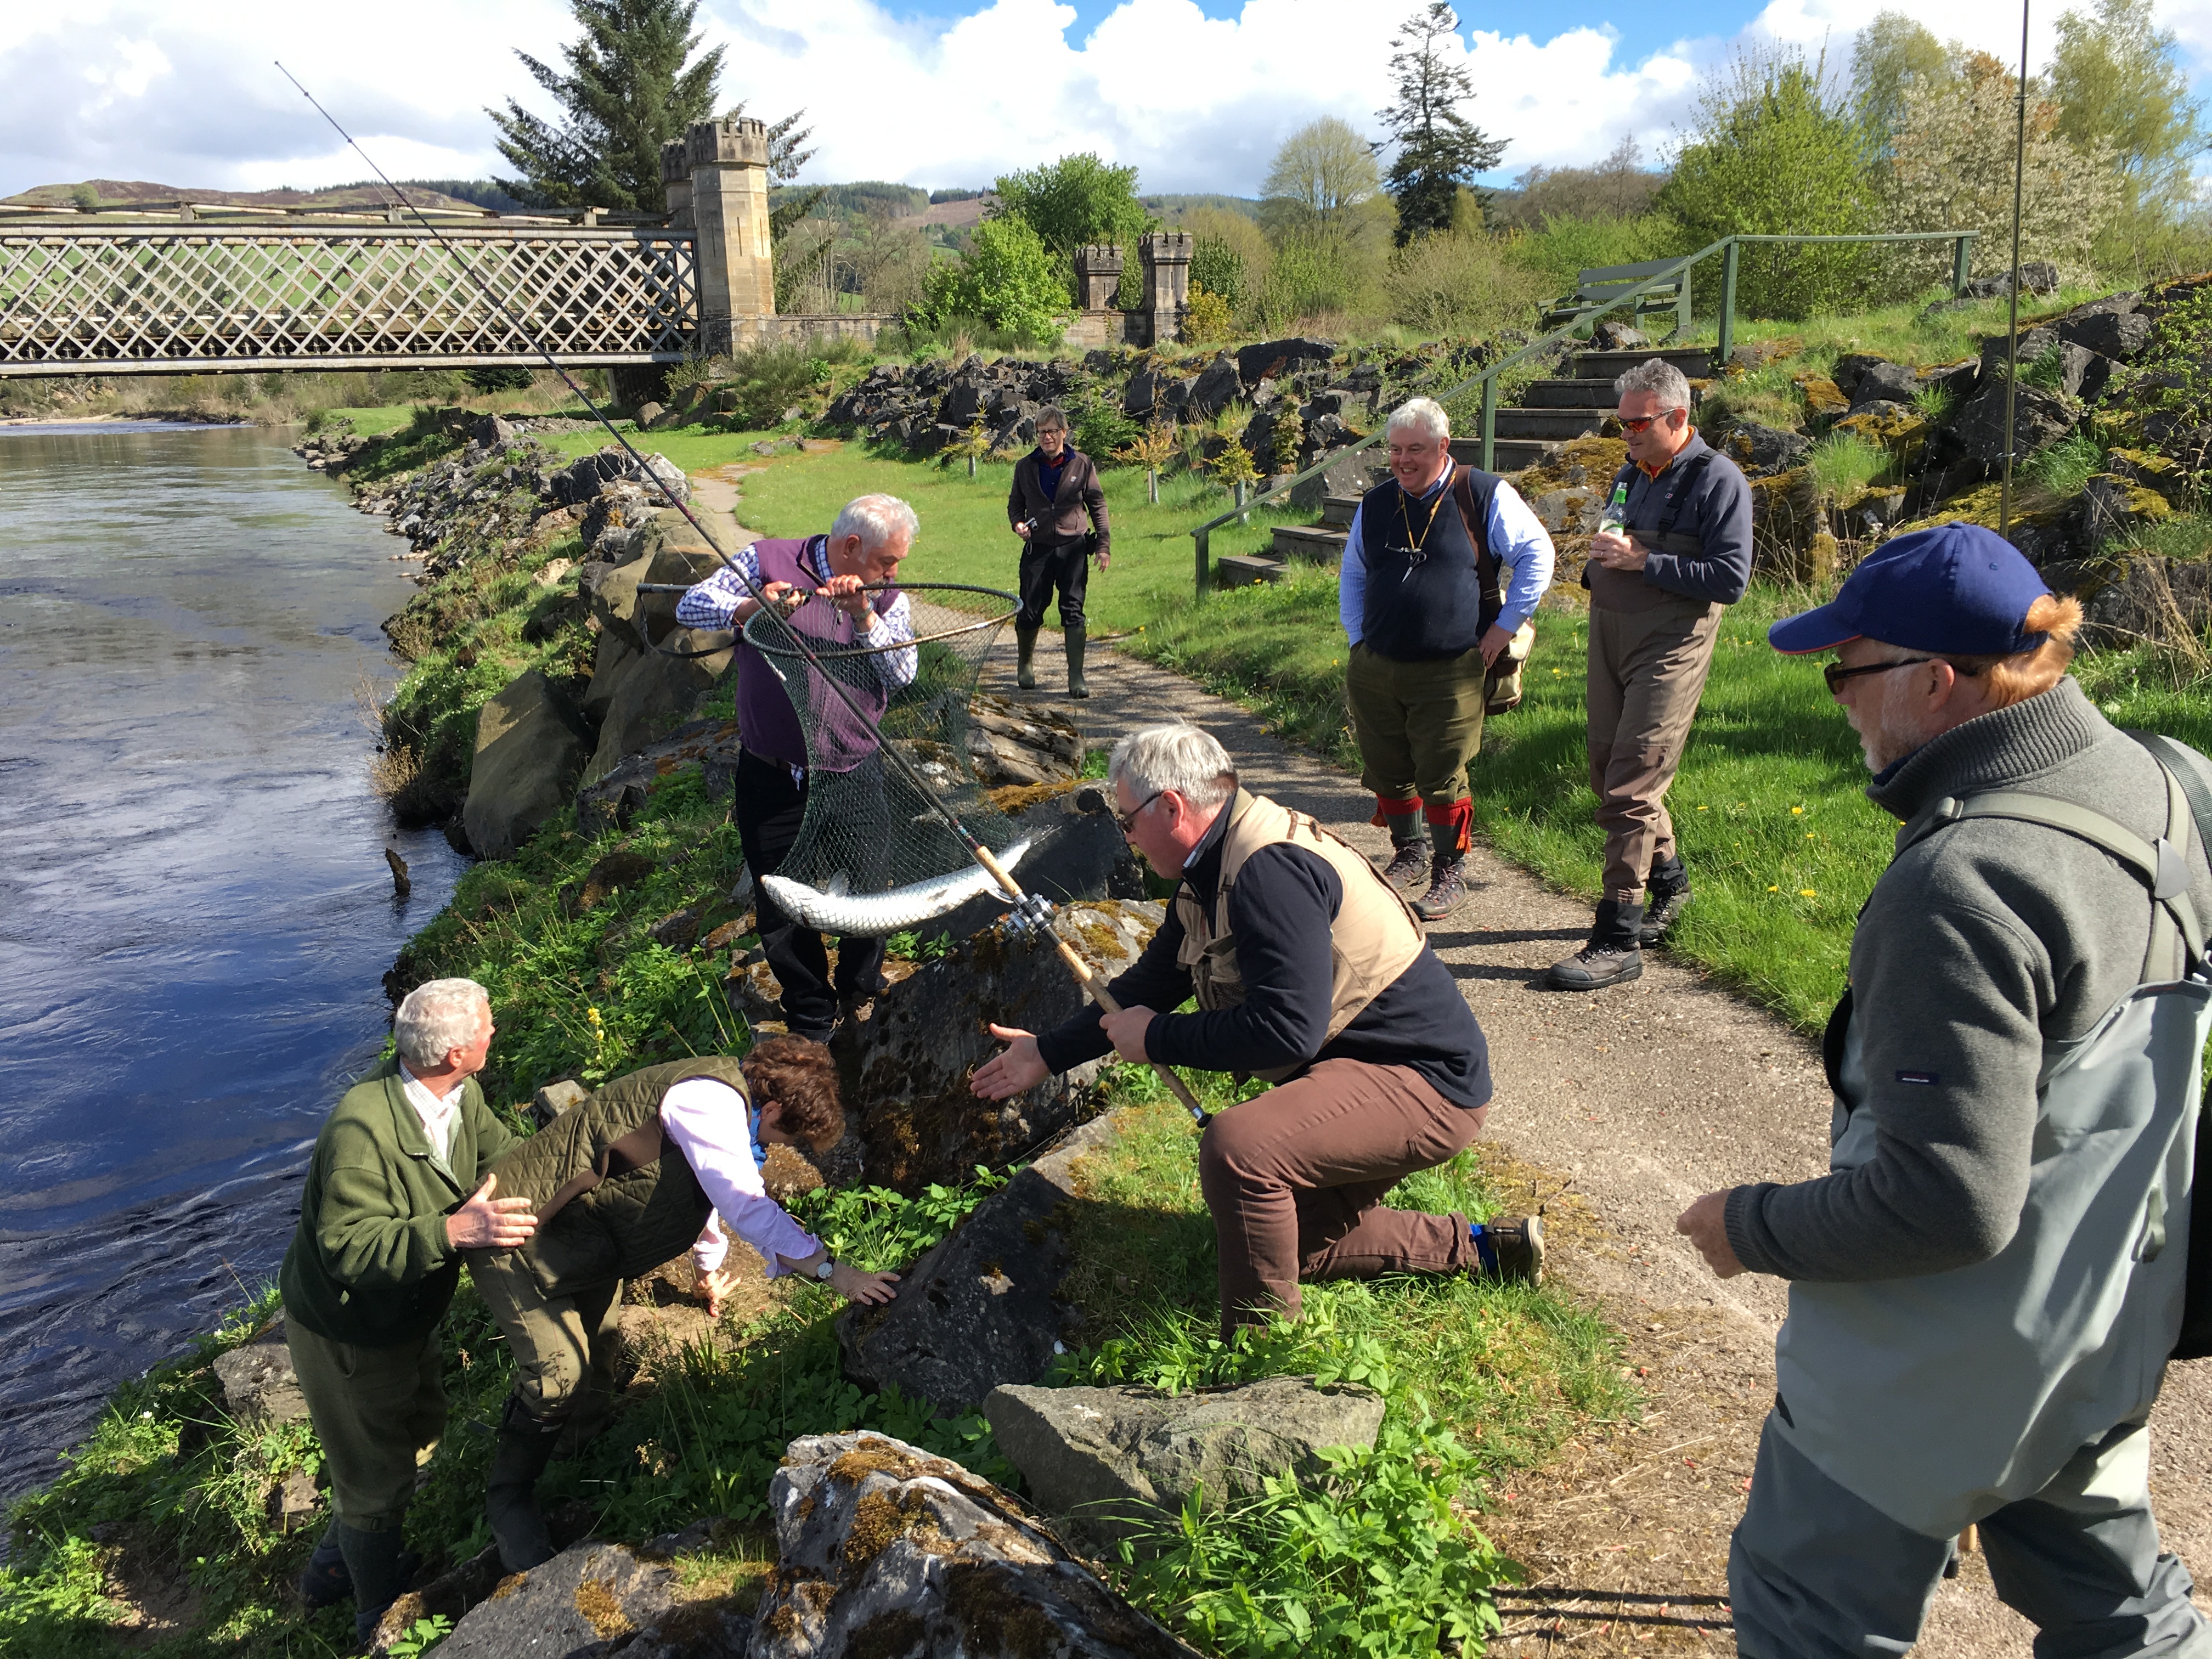 5 fishermen, a guide, a ghillie, a princess and a 22lb salmon on the Tay